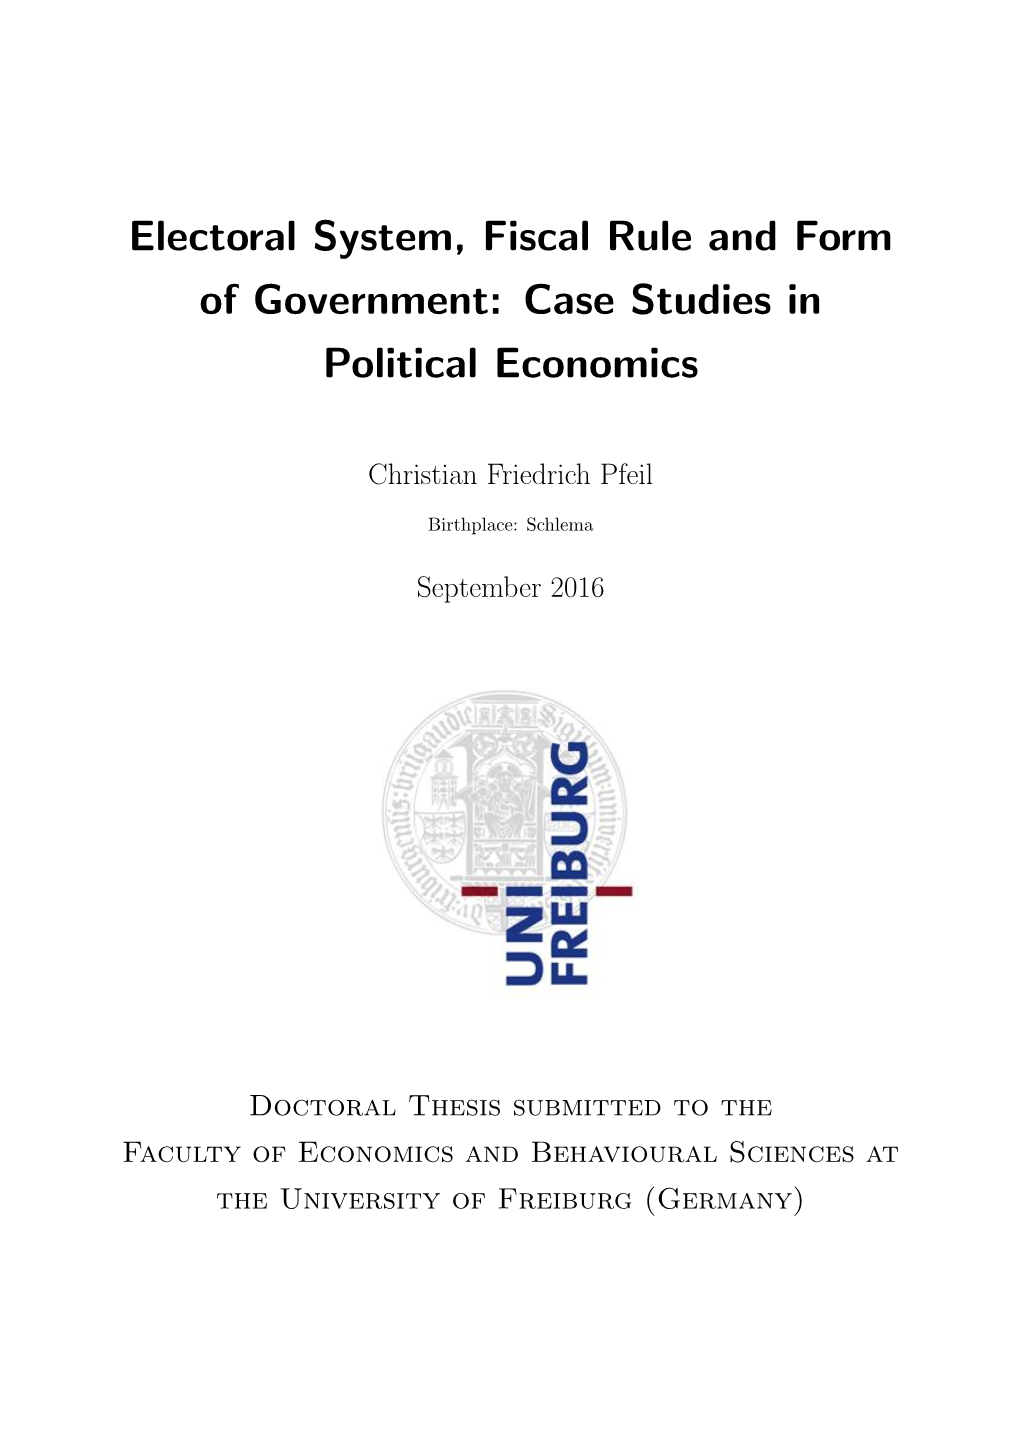 Electoral System, Fiscal Rule and Form of Government: Case Studies in Political Economics